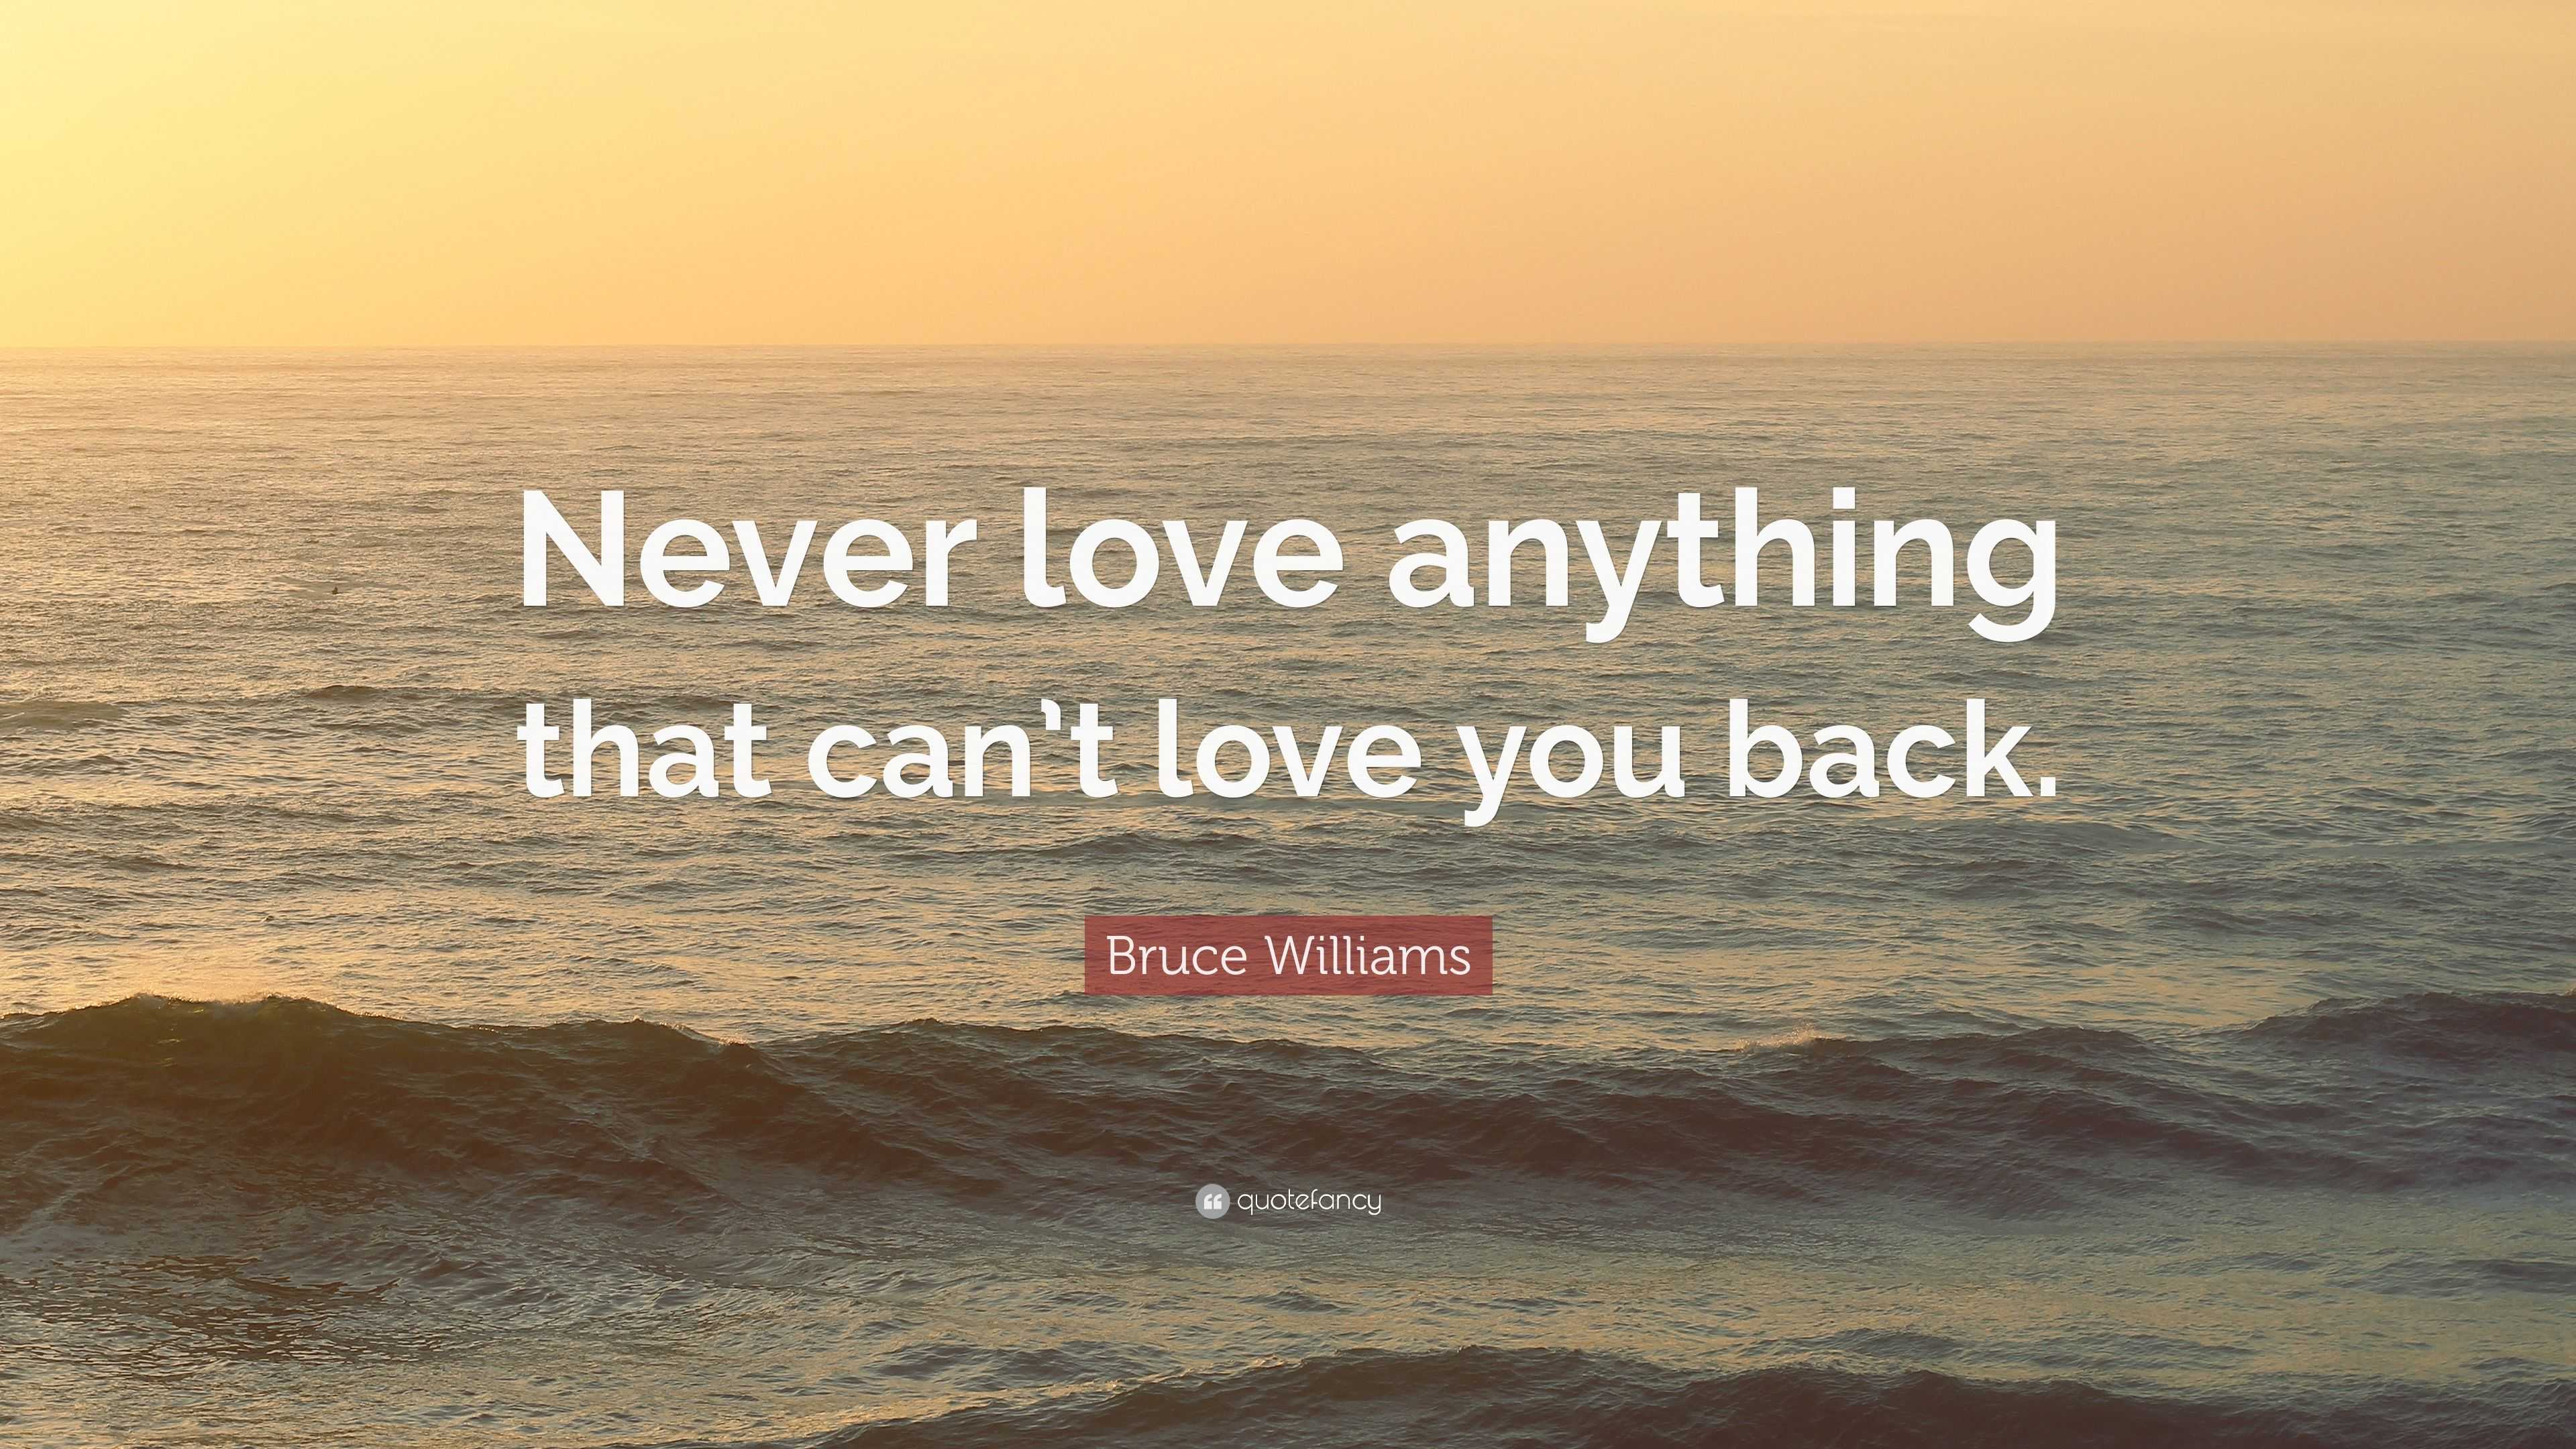 Bruce Williams Quote “Never love anything that can t love you back